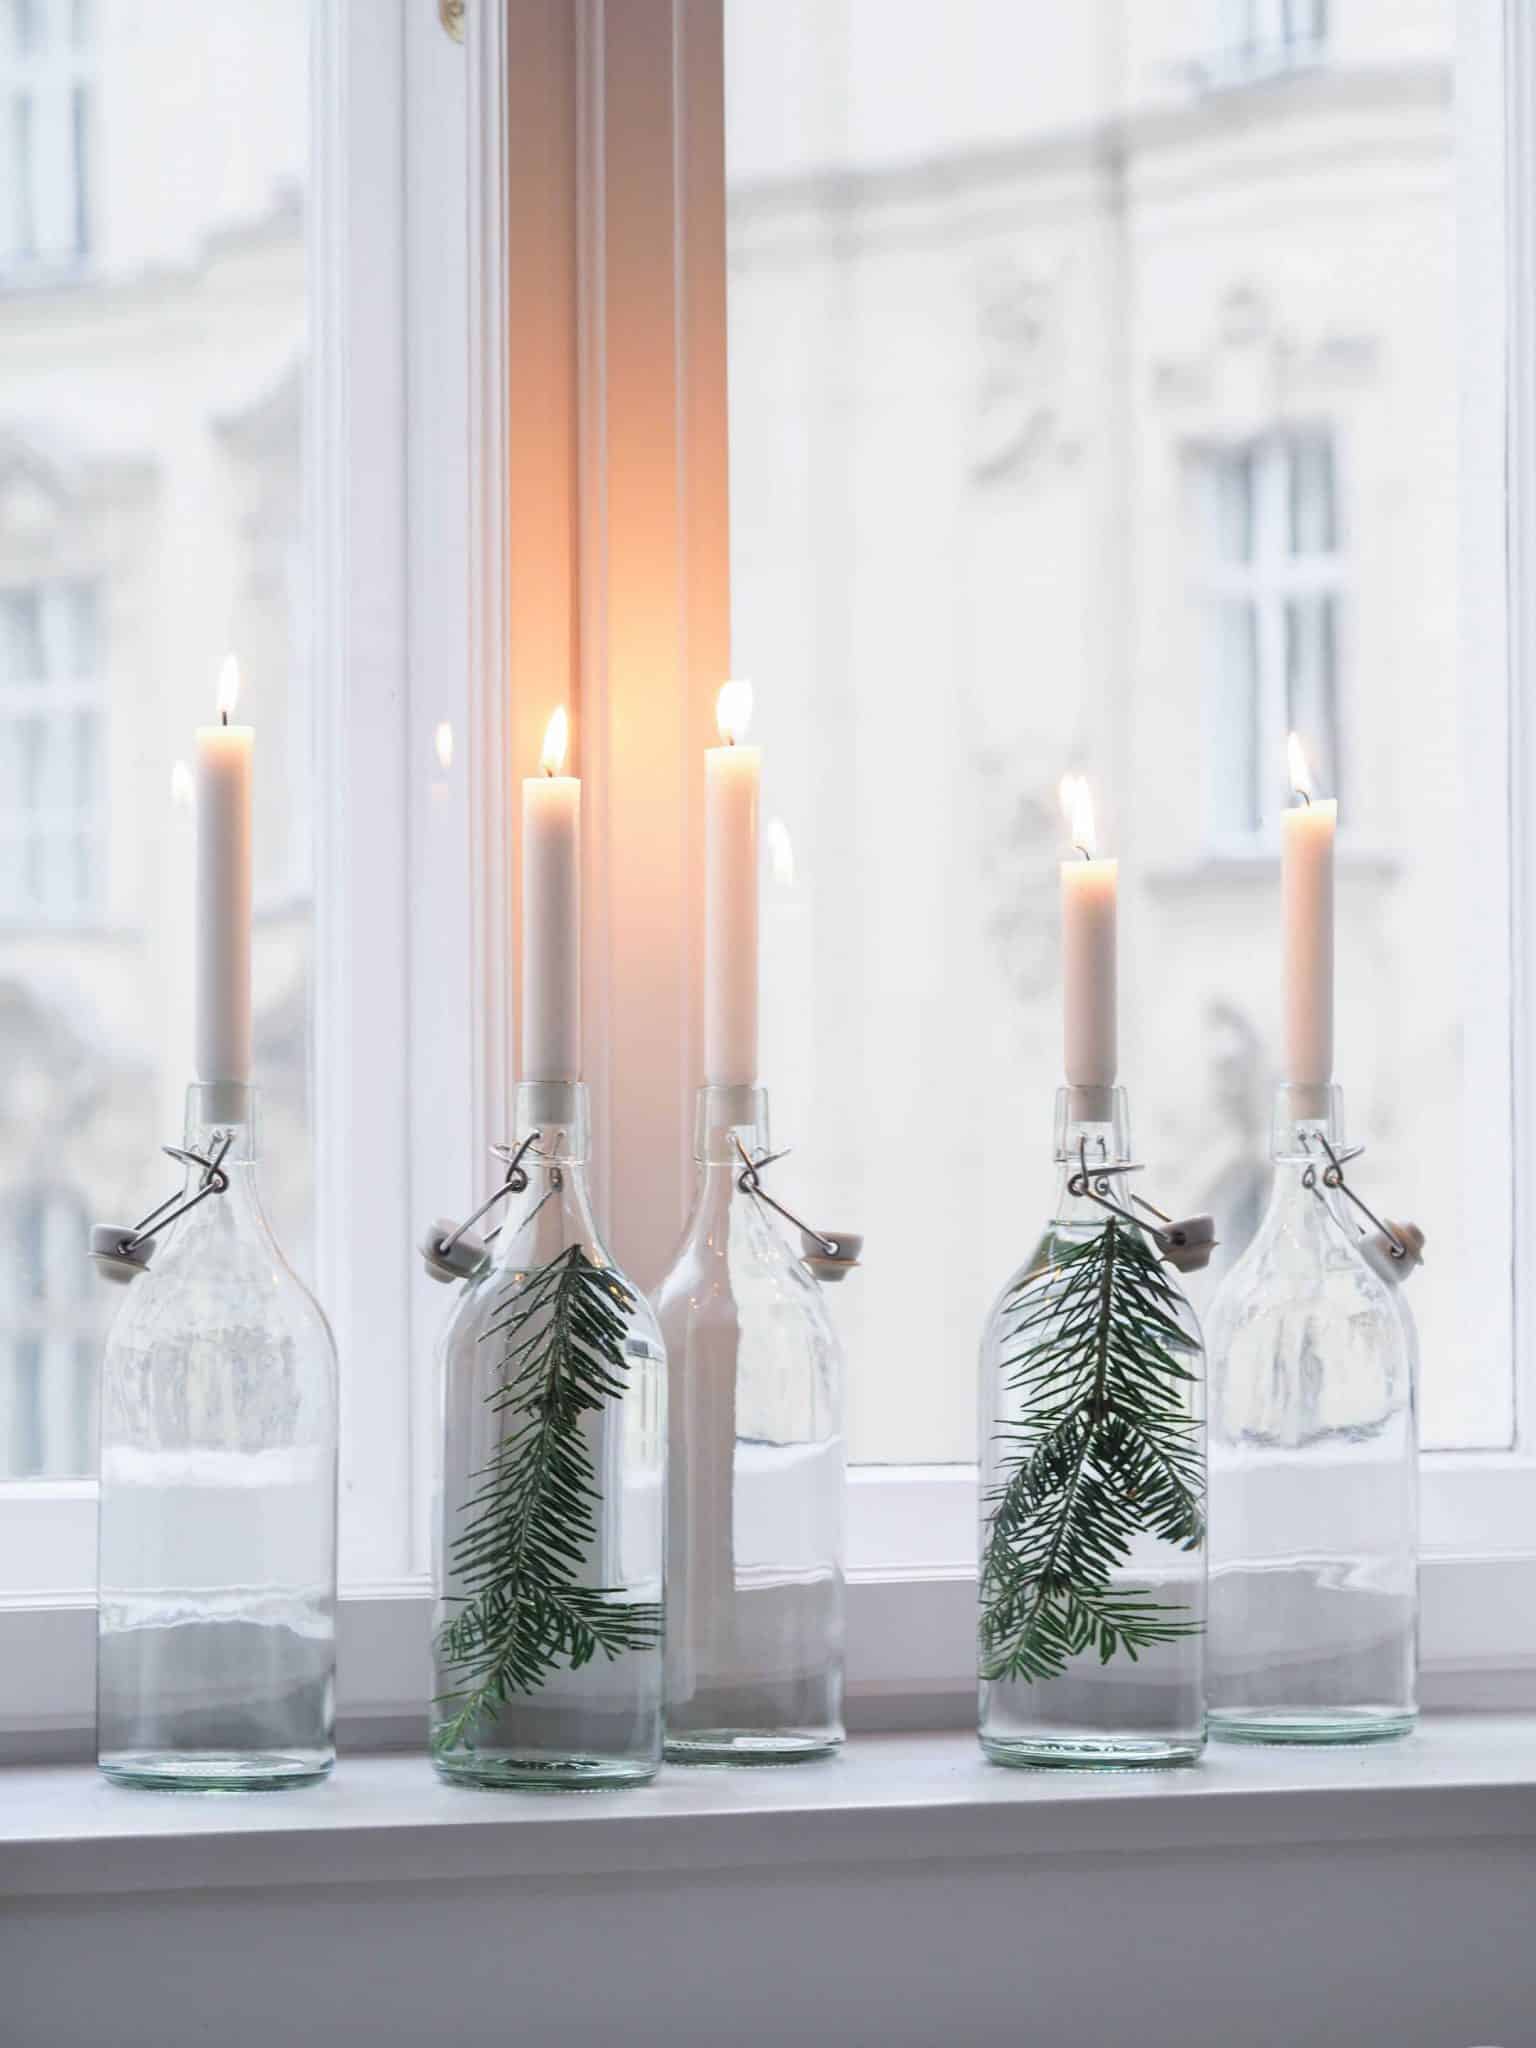 Foliage candle holder Christmas decorations made using natural and compostable materials.